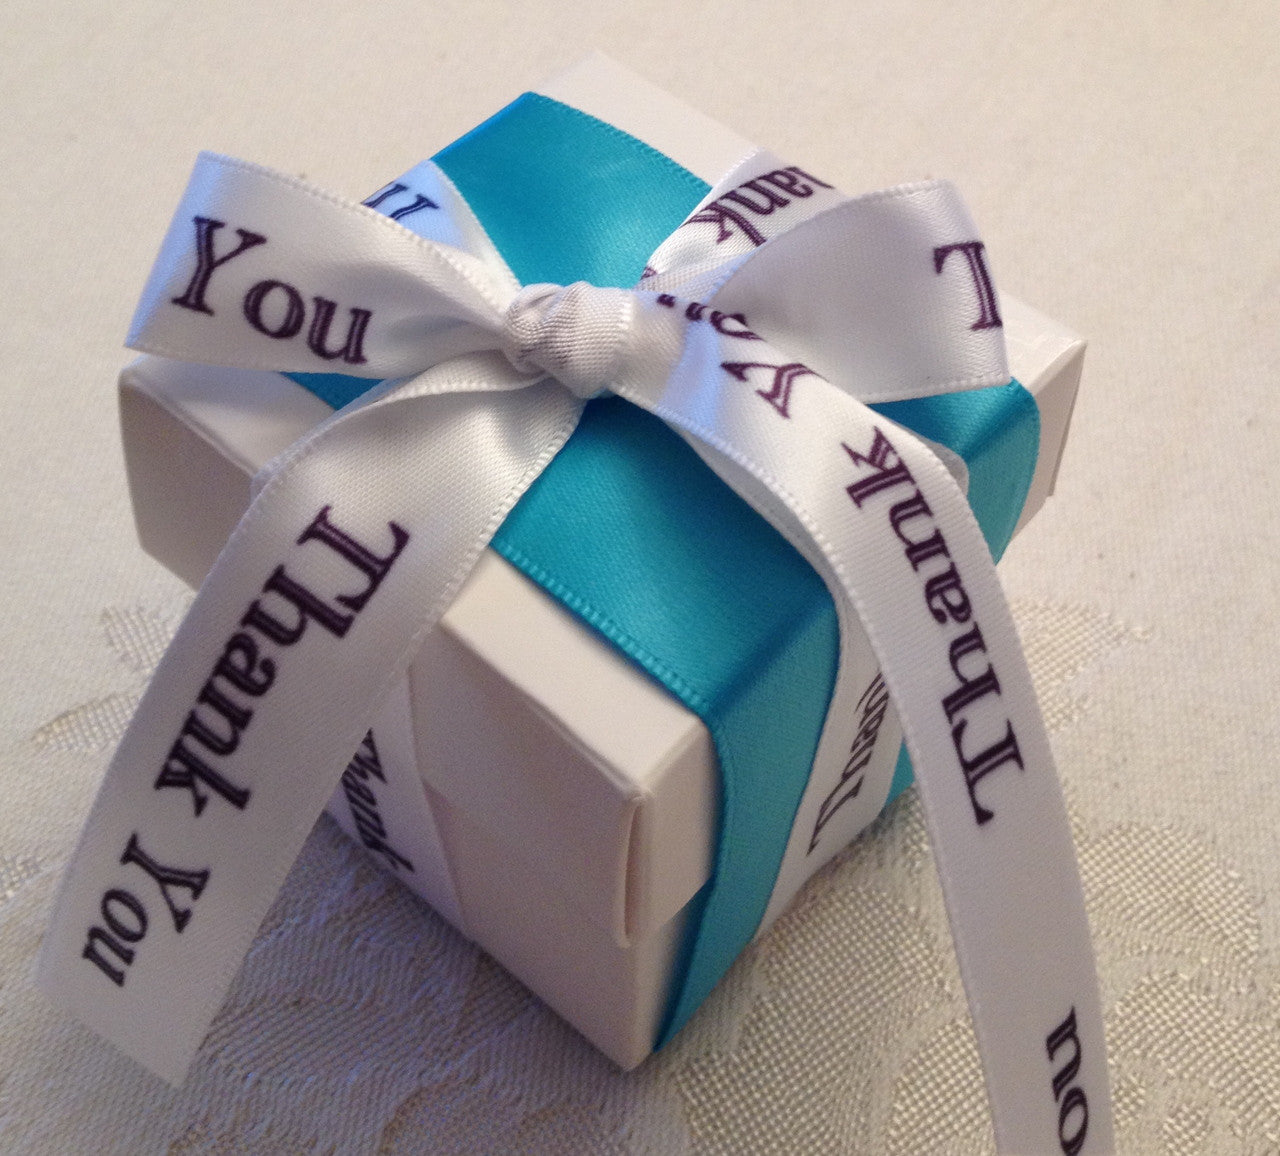 The "Tiffany" theme is so popular for weddings, engagement parties and showers. This Thank You ribbon in black and white with the blue satin complimentary ribbon is so chic!